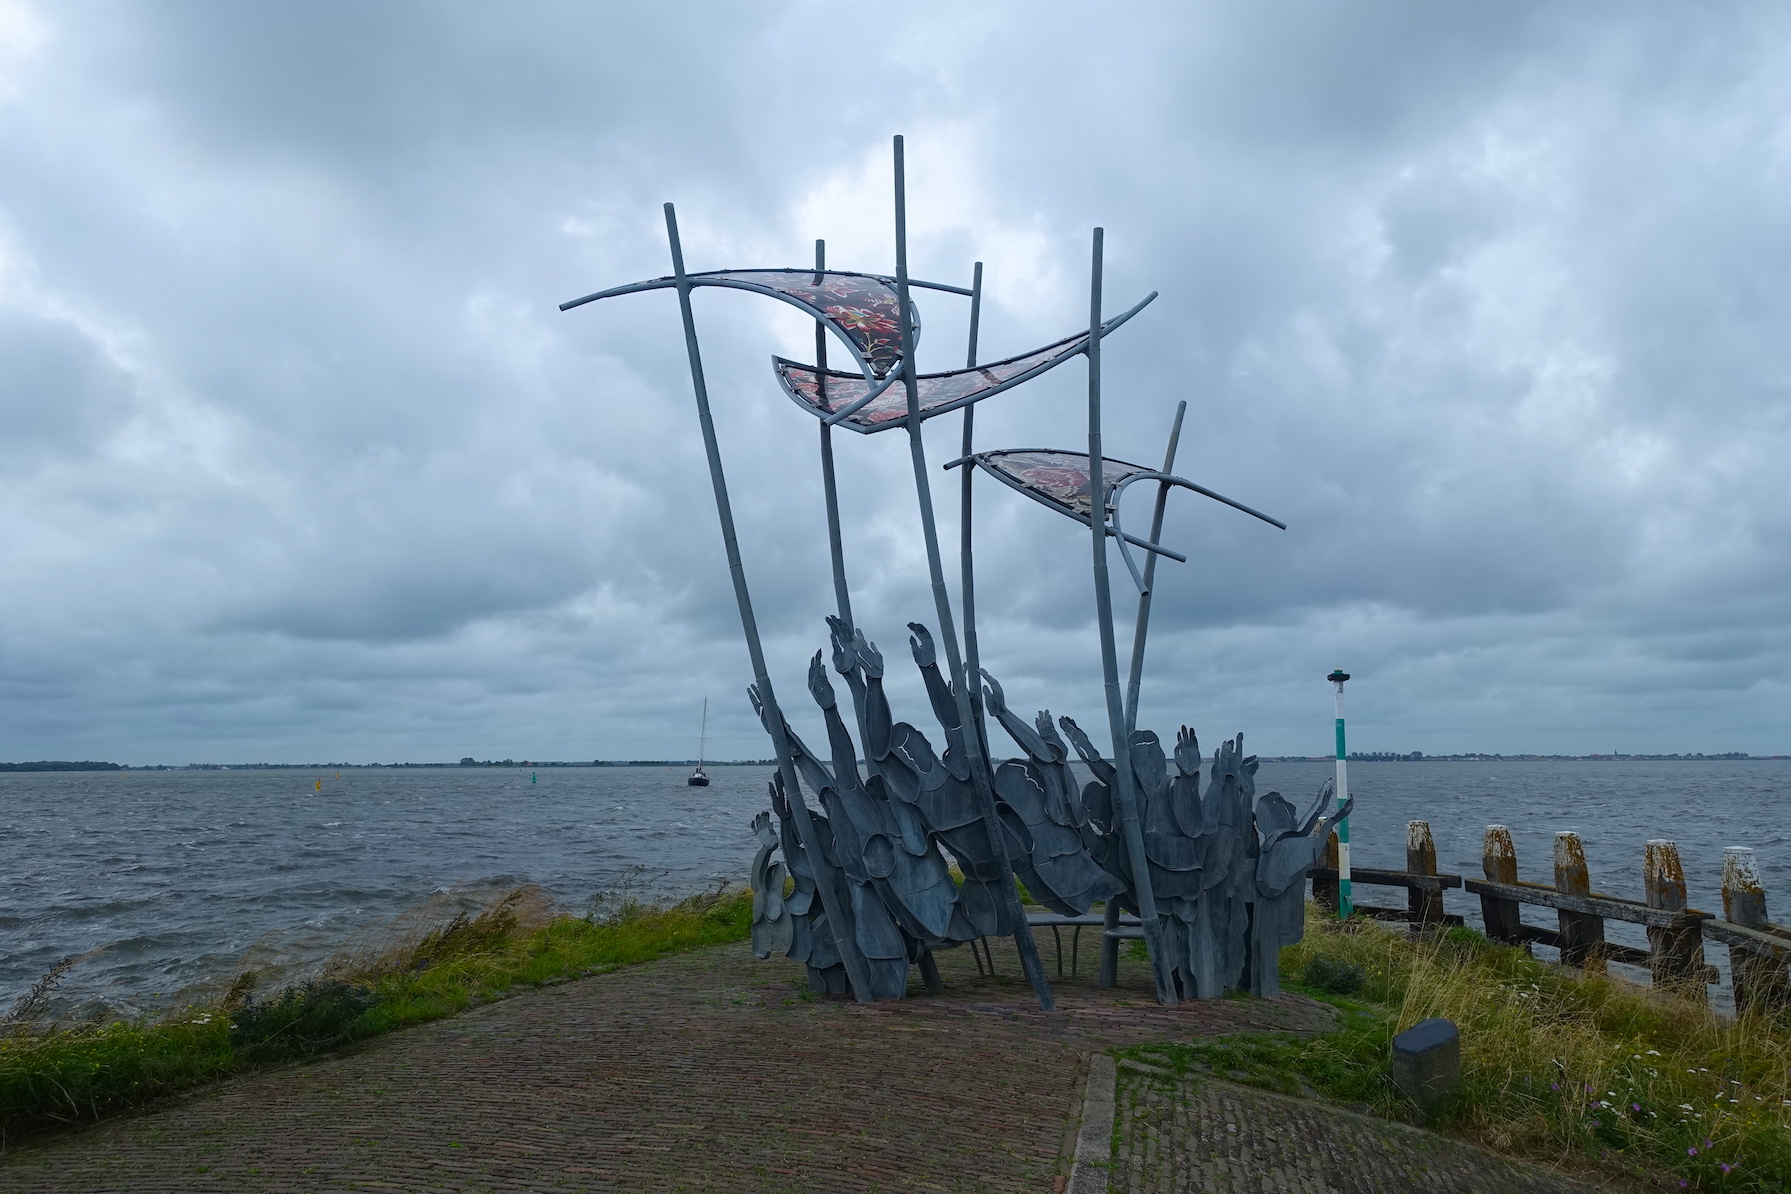 A view of the Markermeer and the flood memorial in Marken